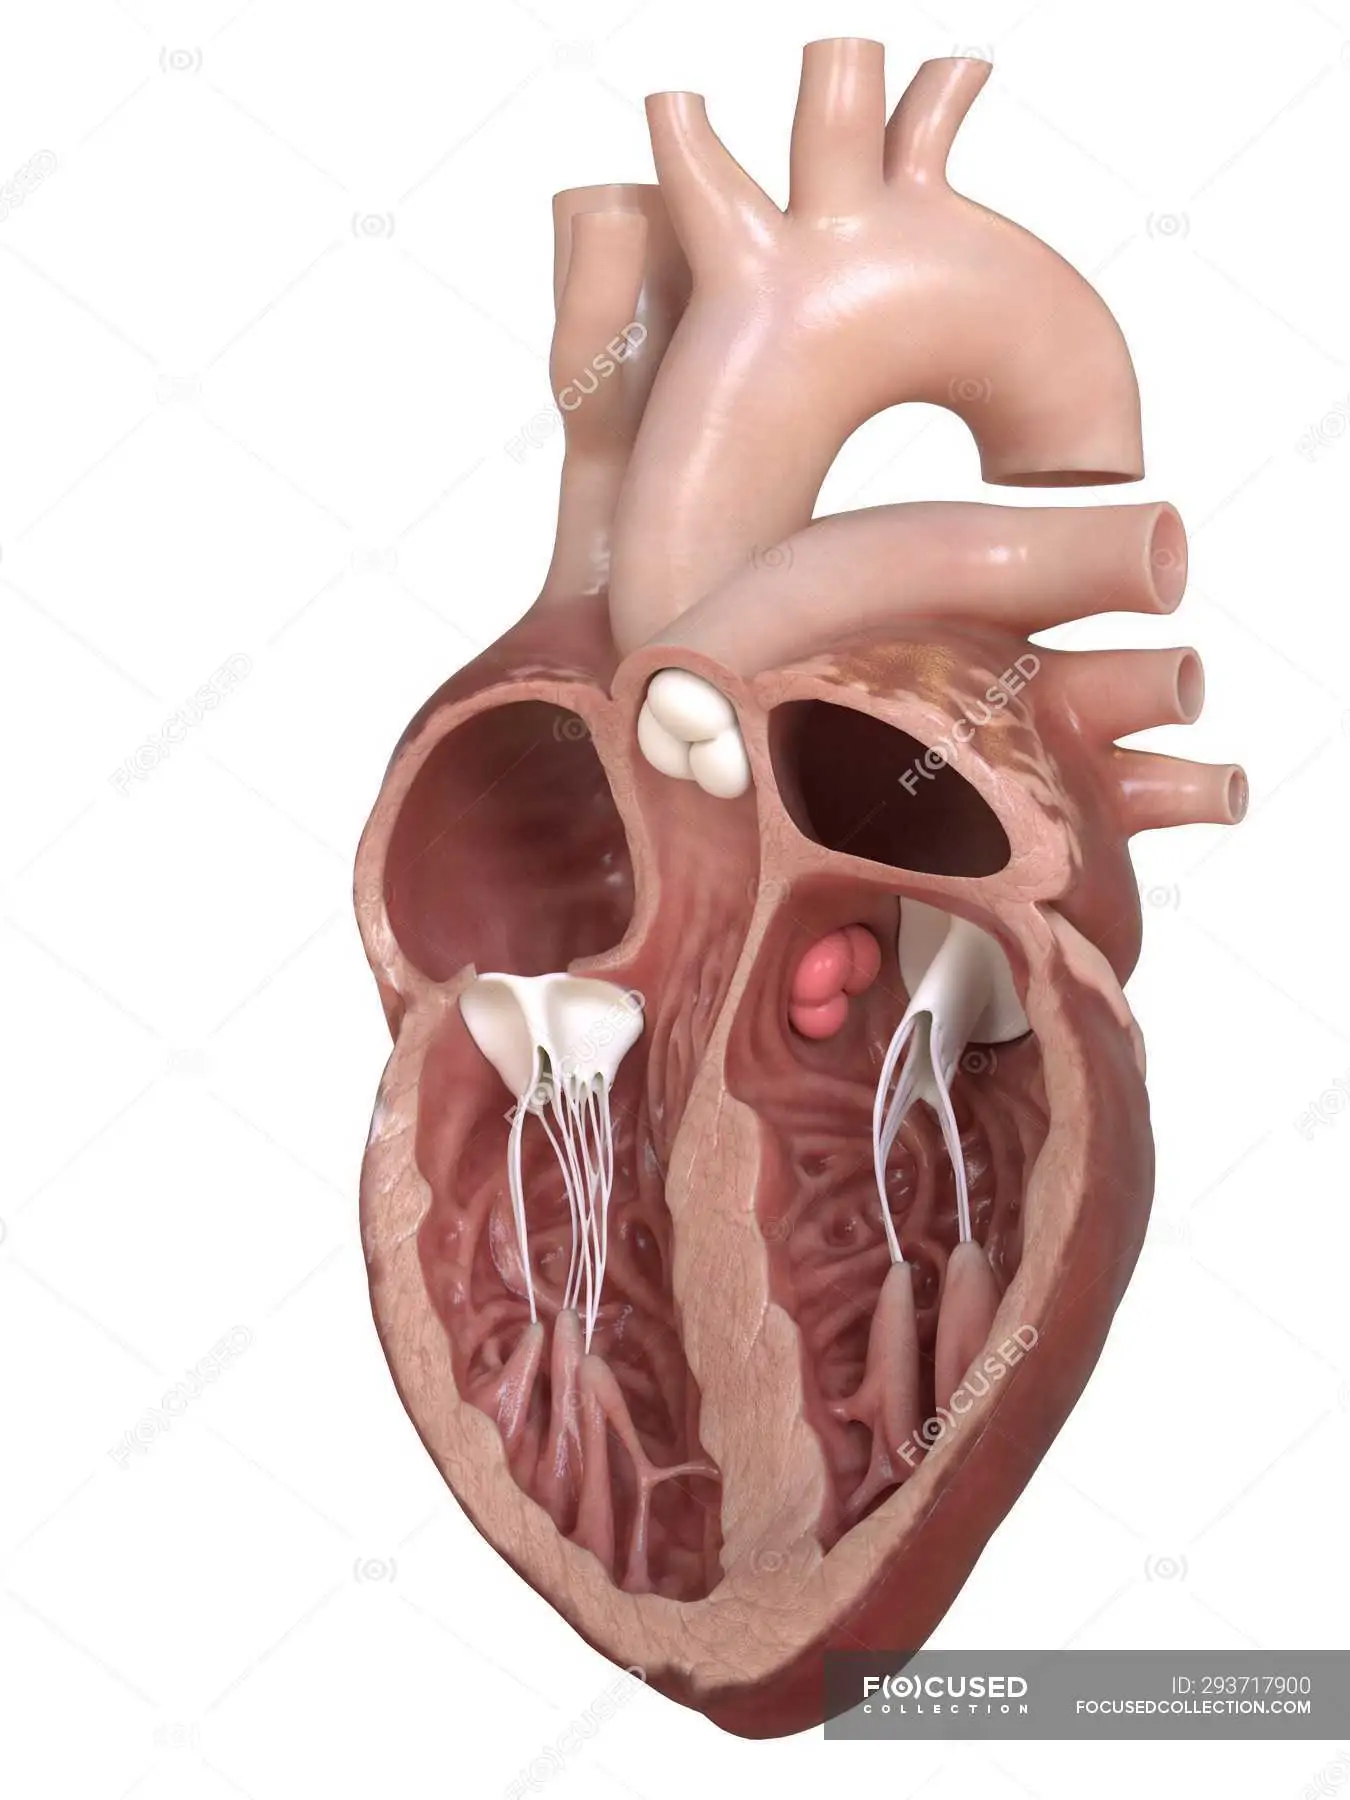 Human heart anatomy showing valves, cross section illustration. — 3d,  aortic valve - Stock Photo | #293717900